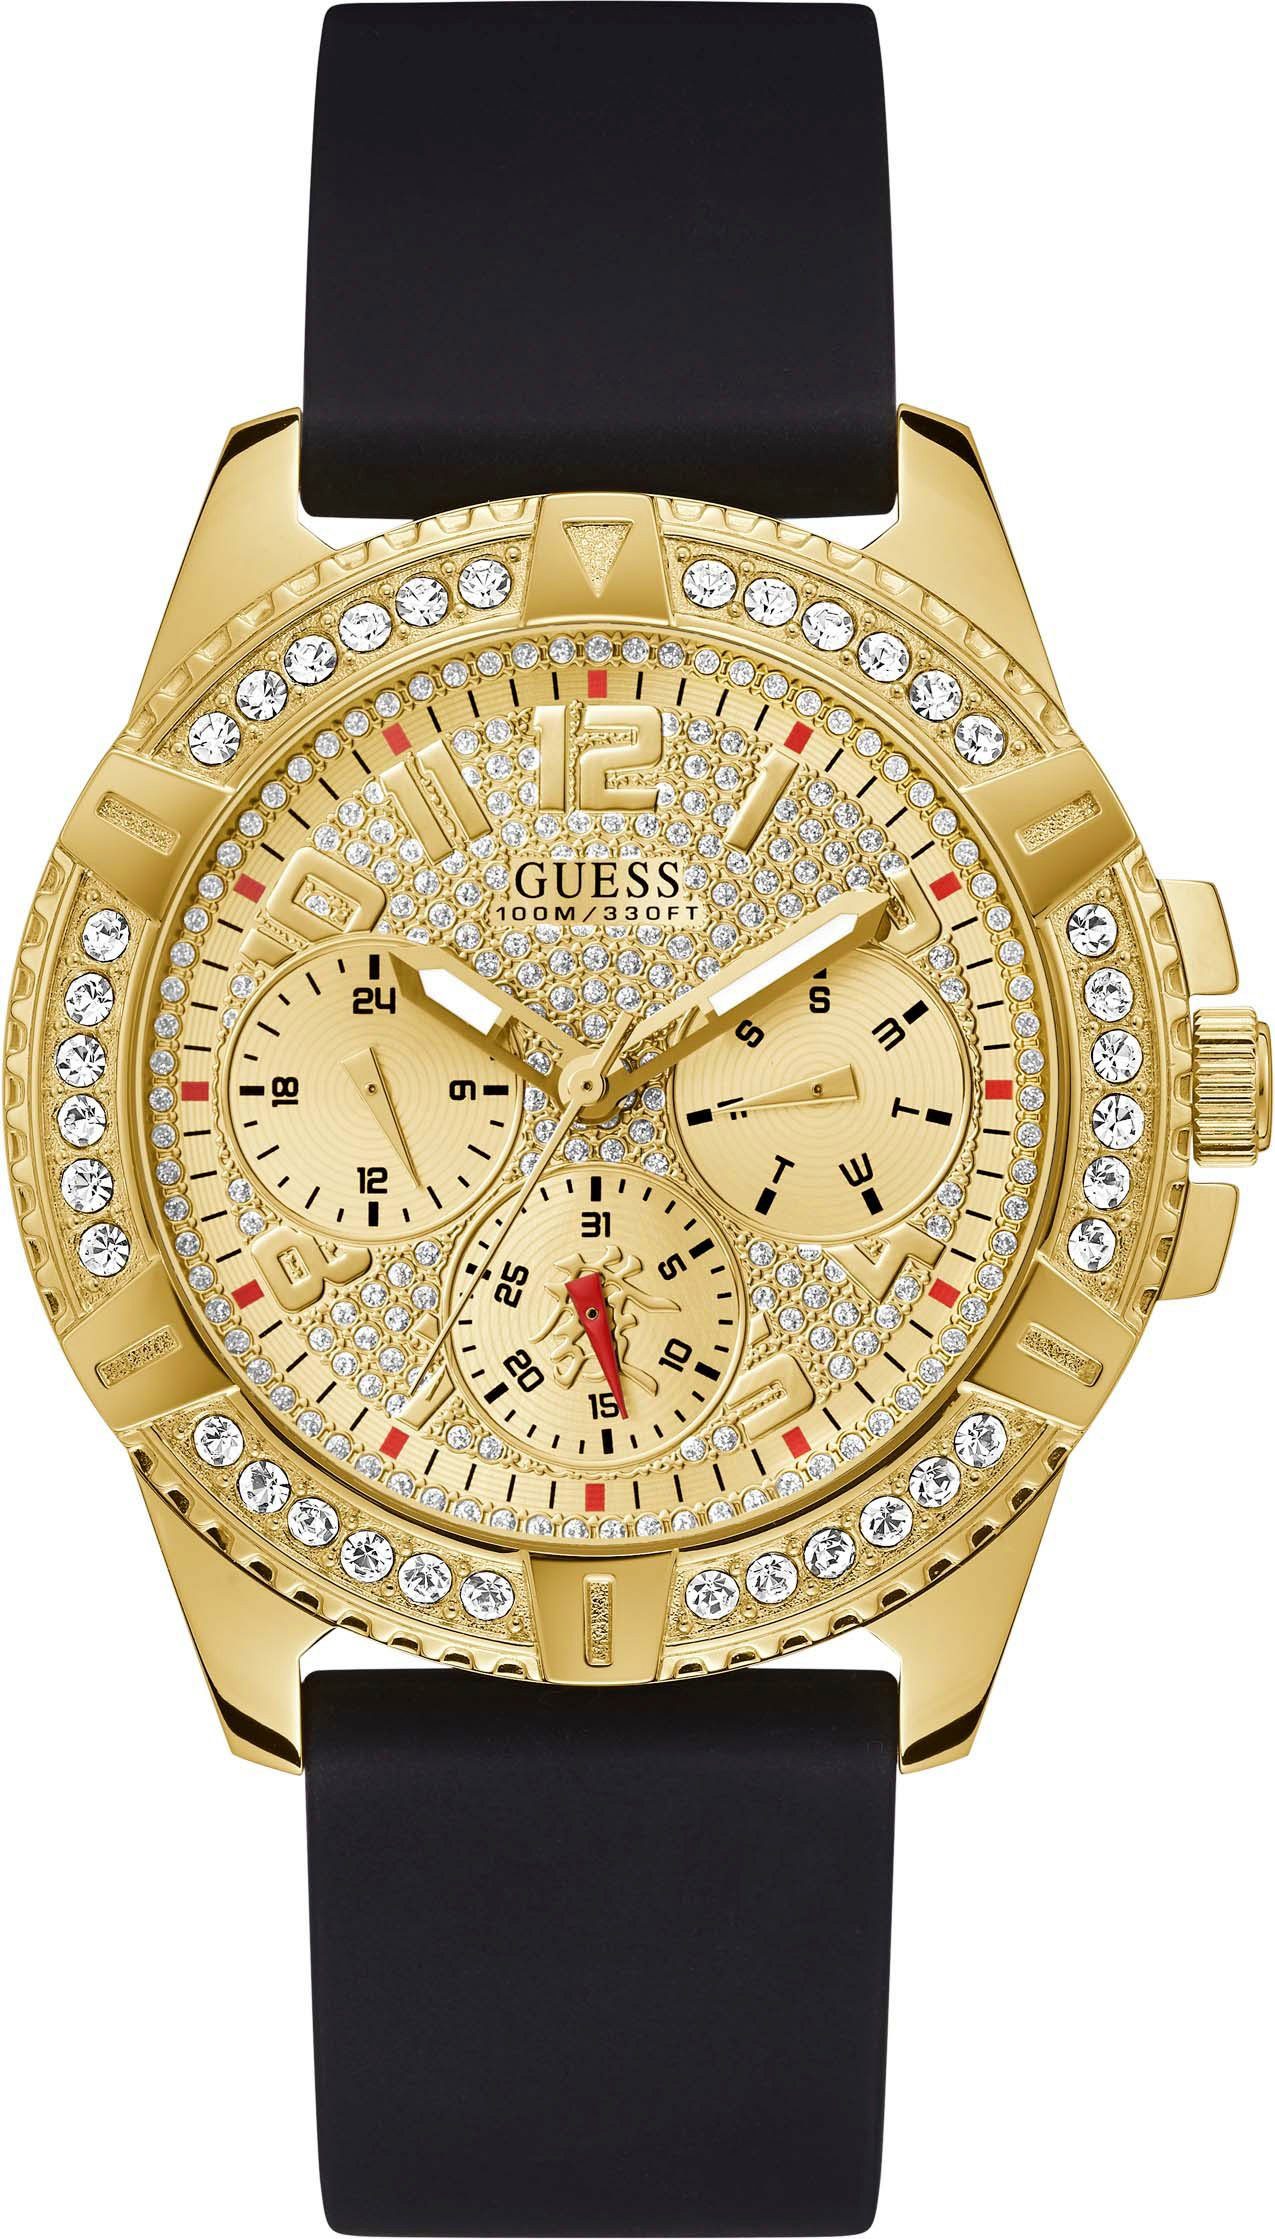 Multifunktionsuhr GW0379G2 Guess